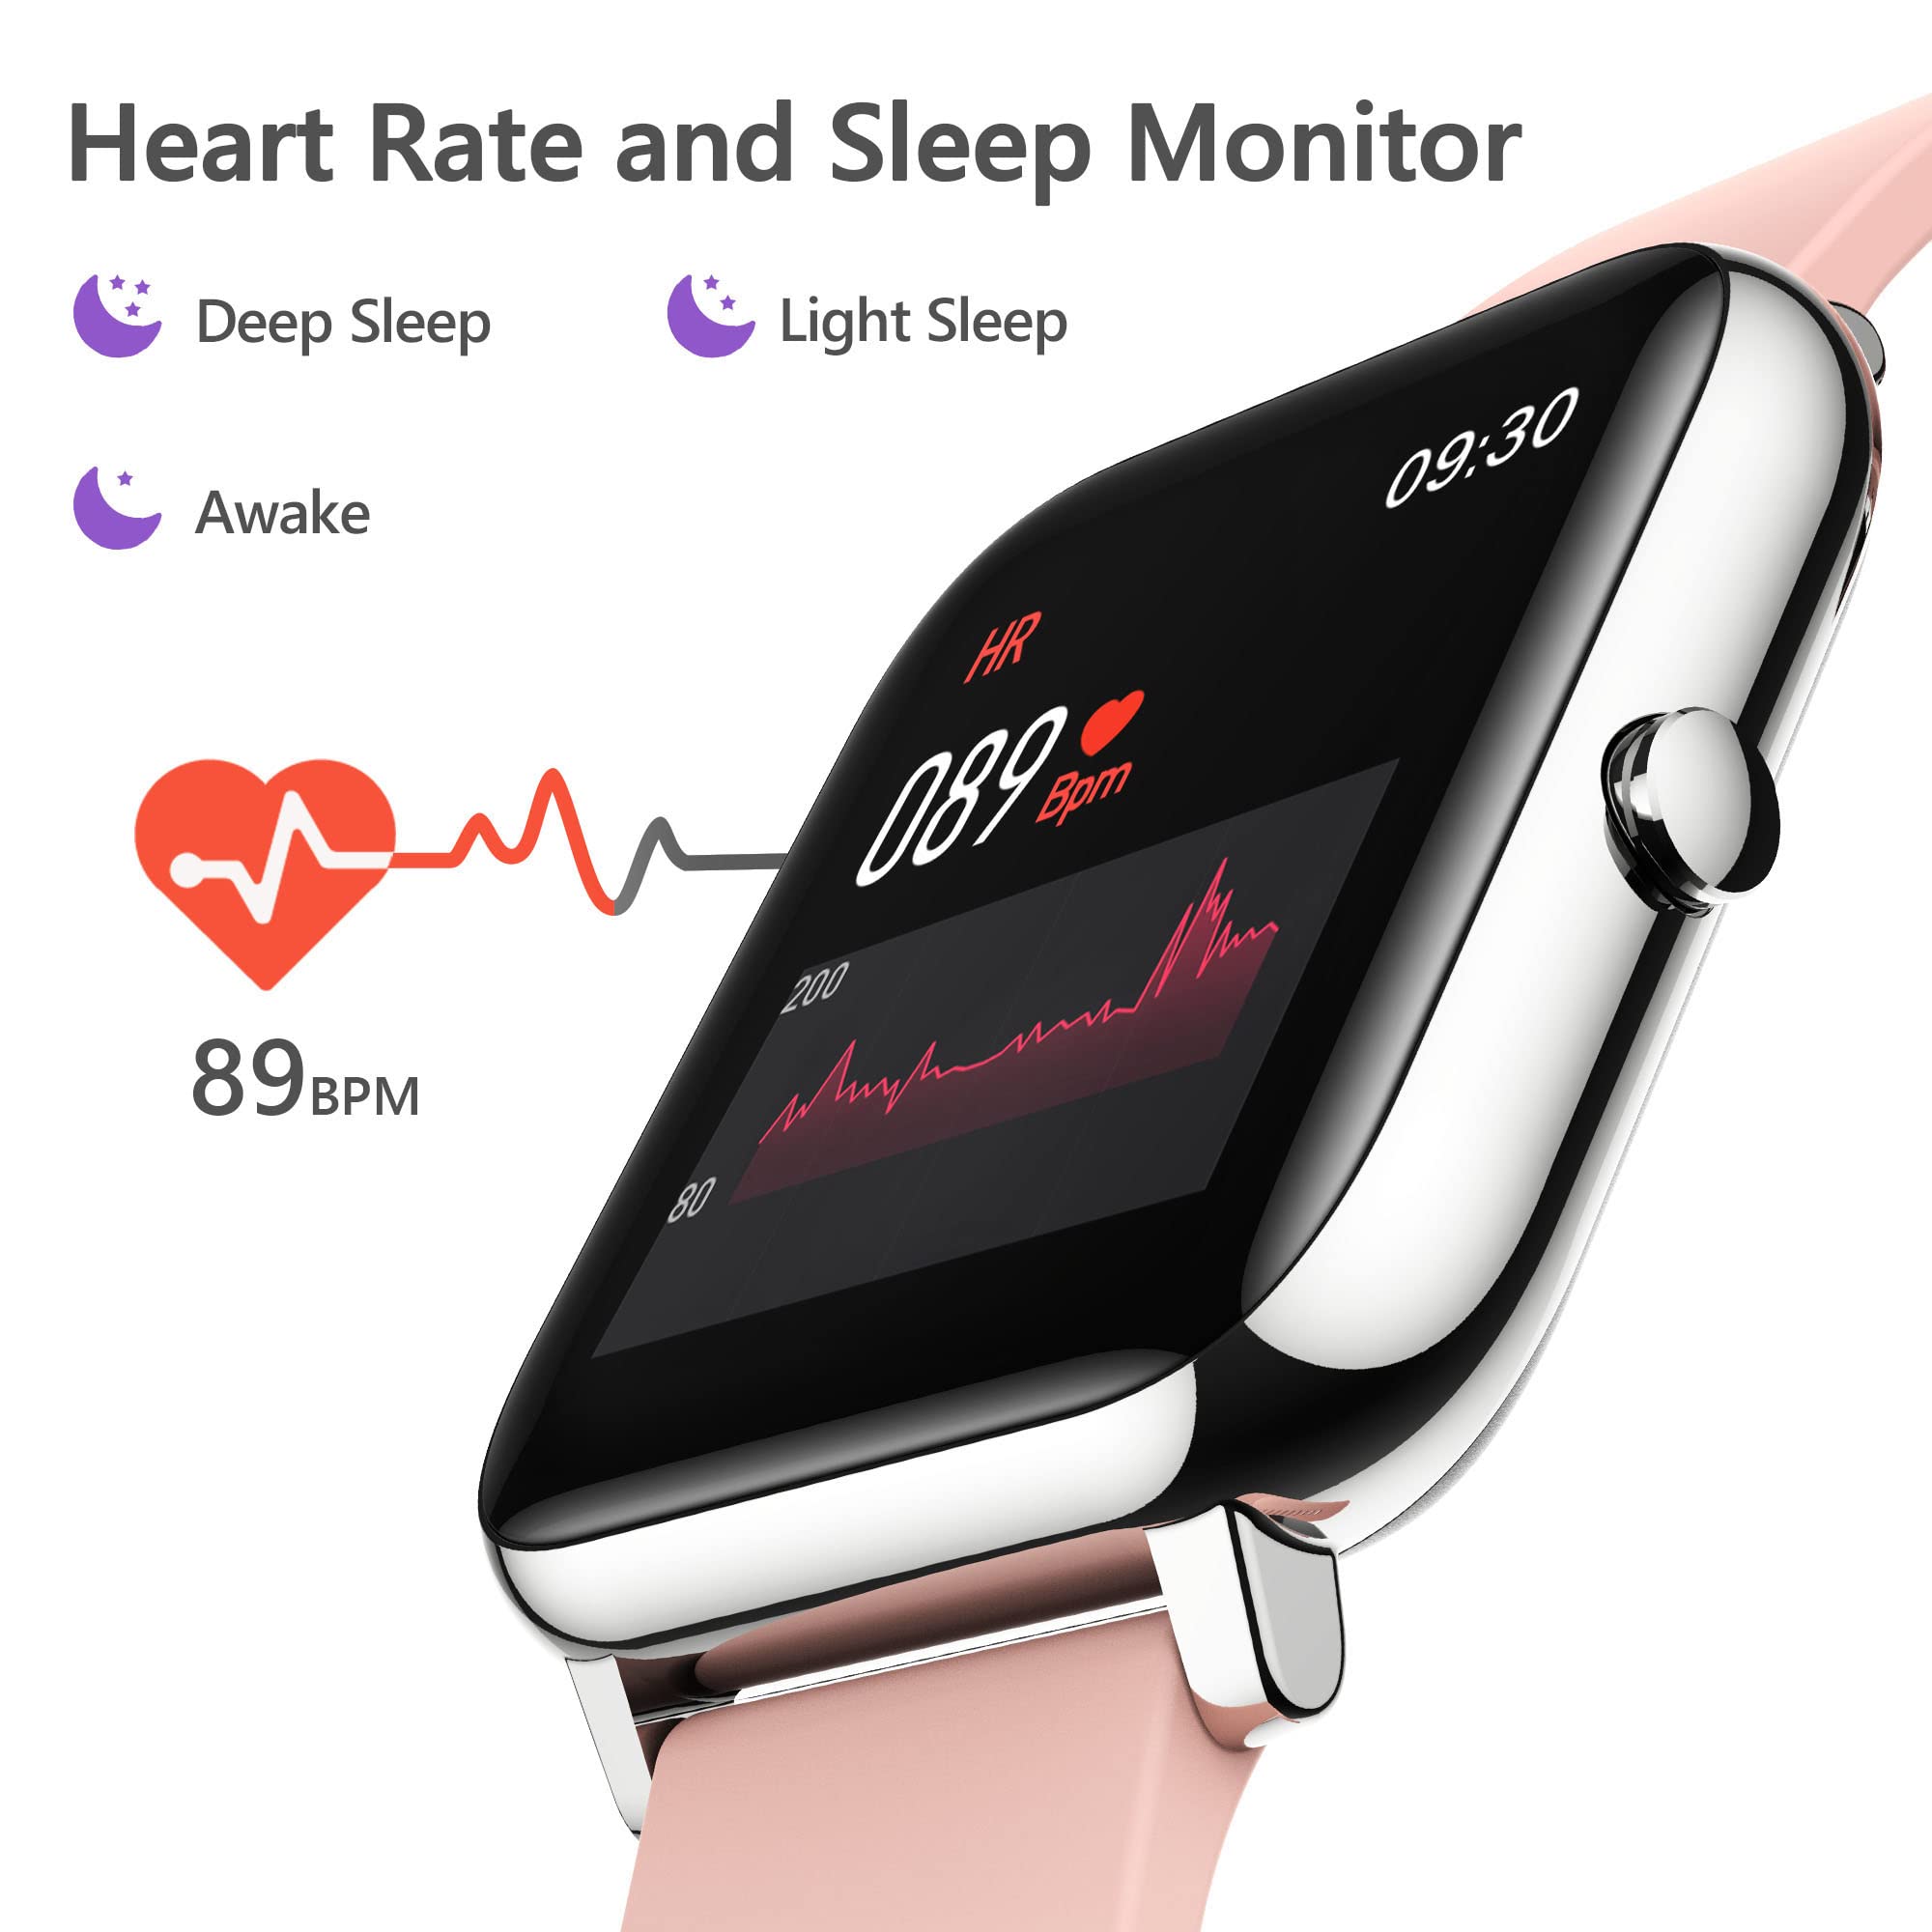 KALINCO Smart Watch, Fitness Tracker with Heart Rate Monitor, Blood Pressure, Blood Oxygen Tracking, 1.4 Inch Touch Screen Smartwatch with 3 Cables Compatible with Android iPhone iOS